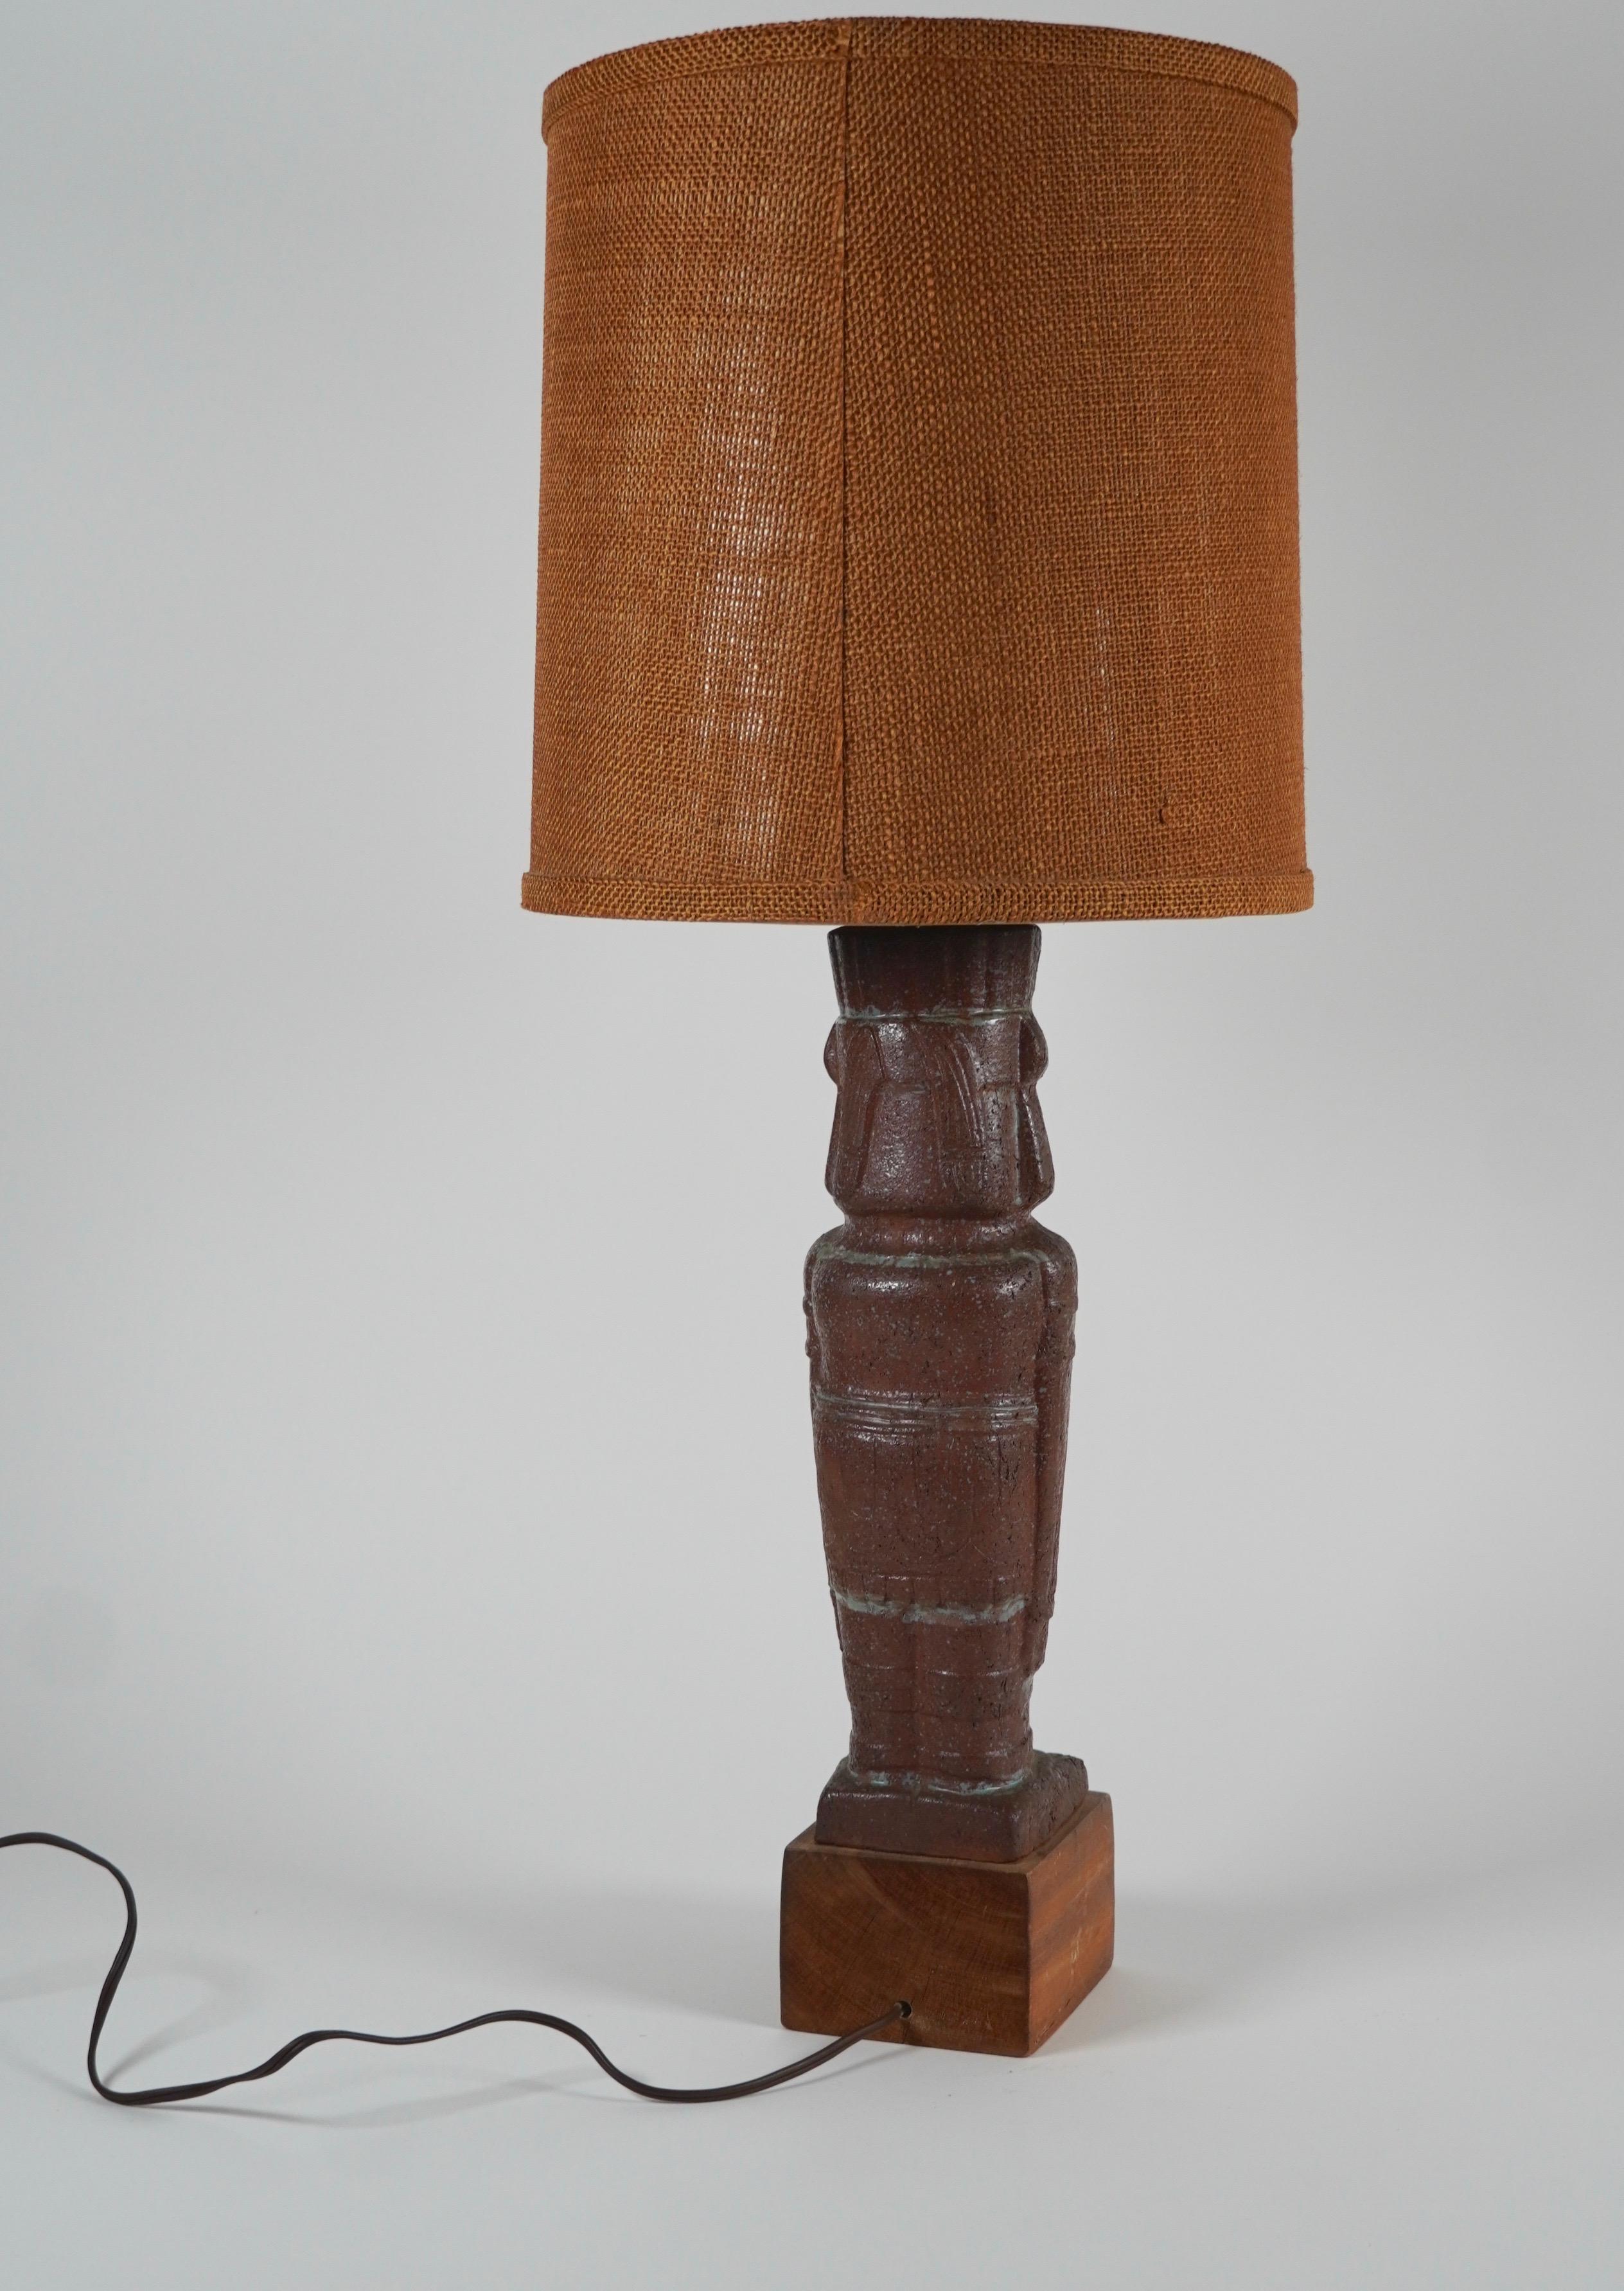 Mexican Ceramic Table Lamp with Aztec Motif, circa 1950s